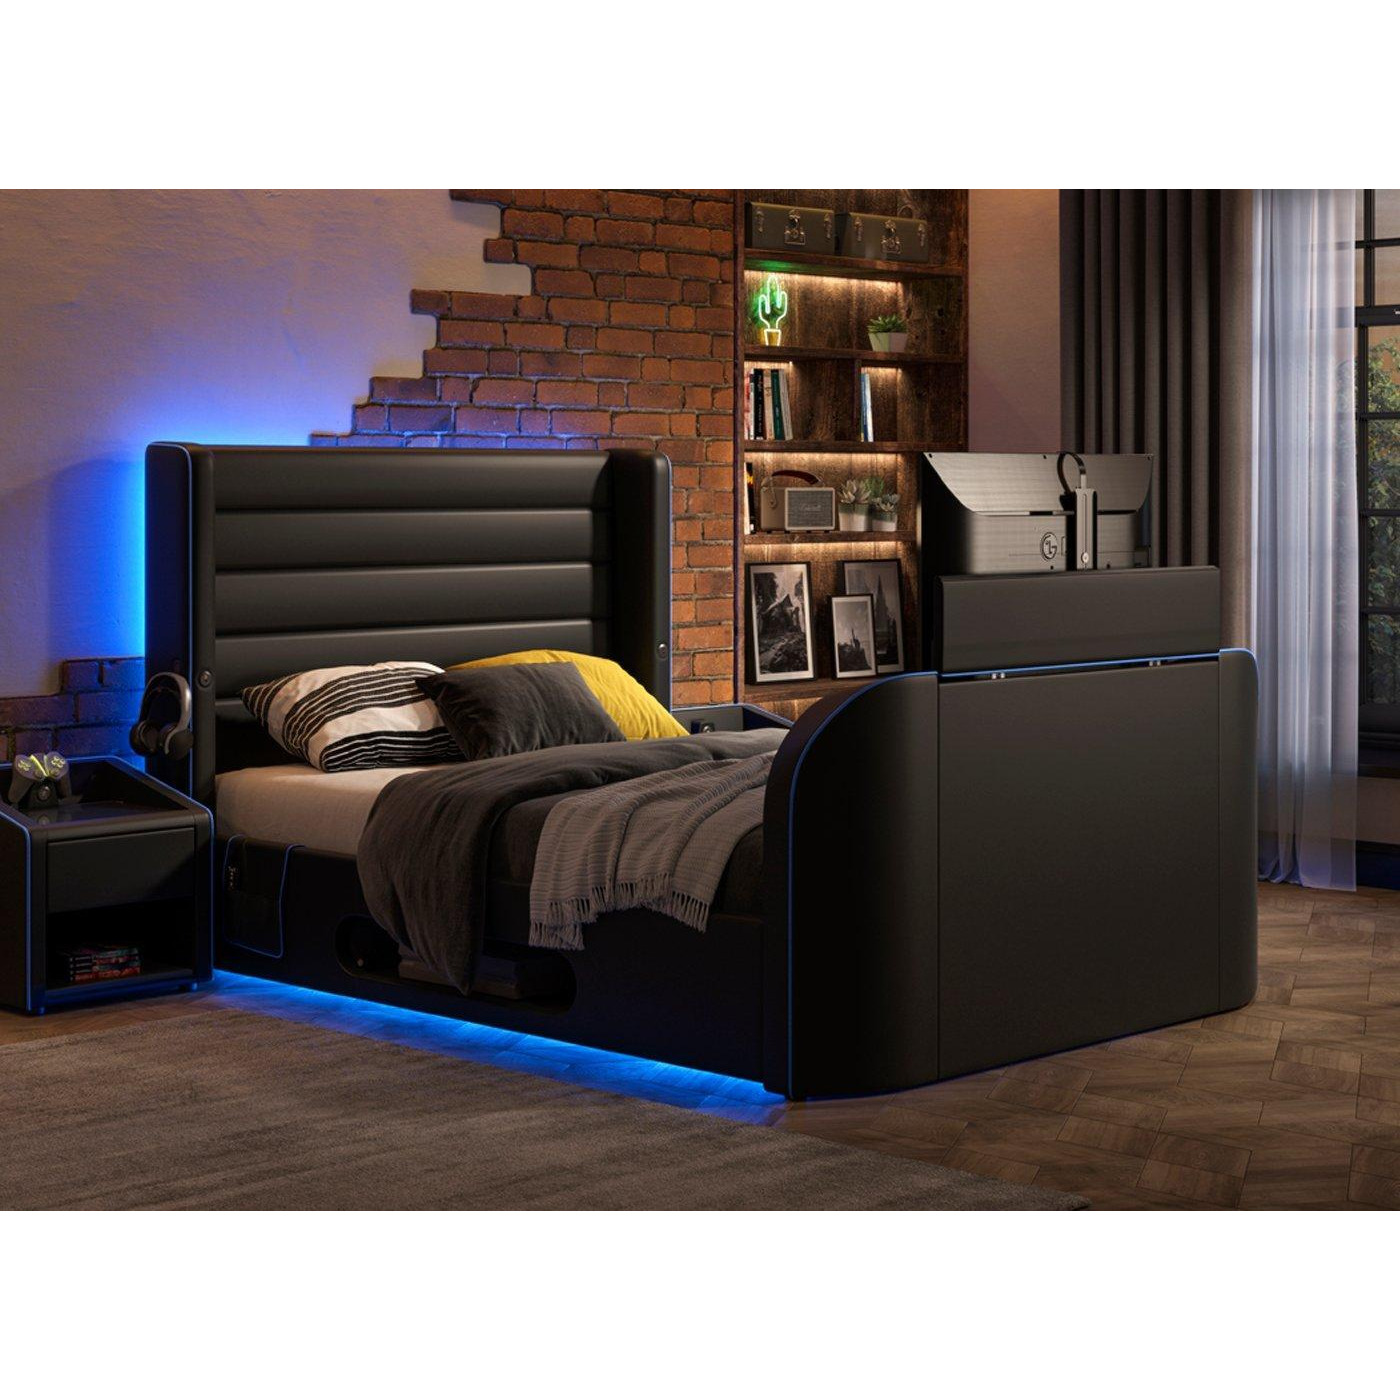 Drift Gaming Ottoman TV Bed Frame - 4'0 Small Double - Black